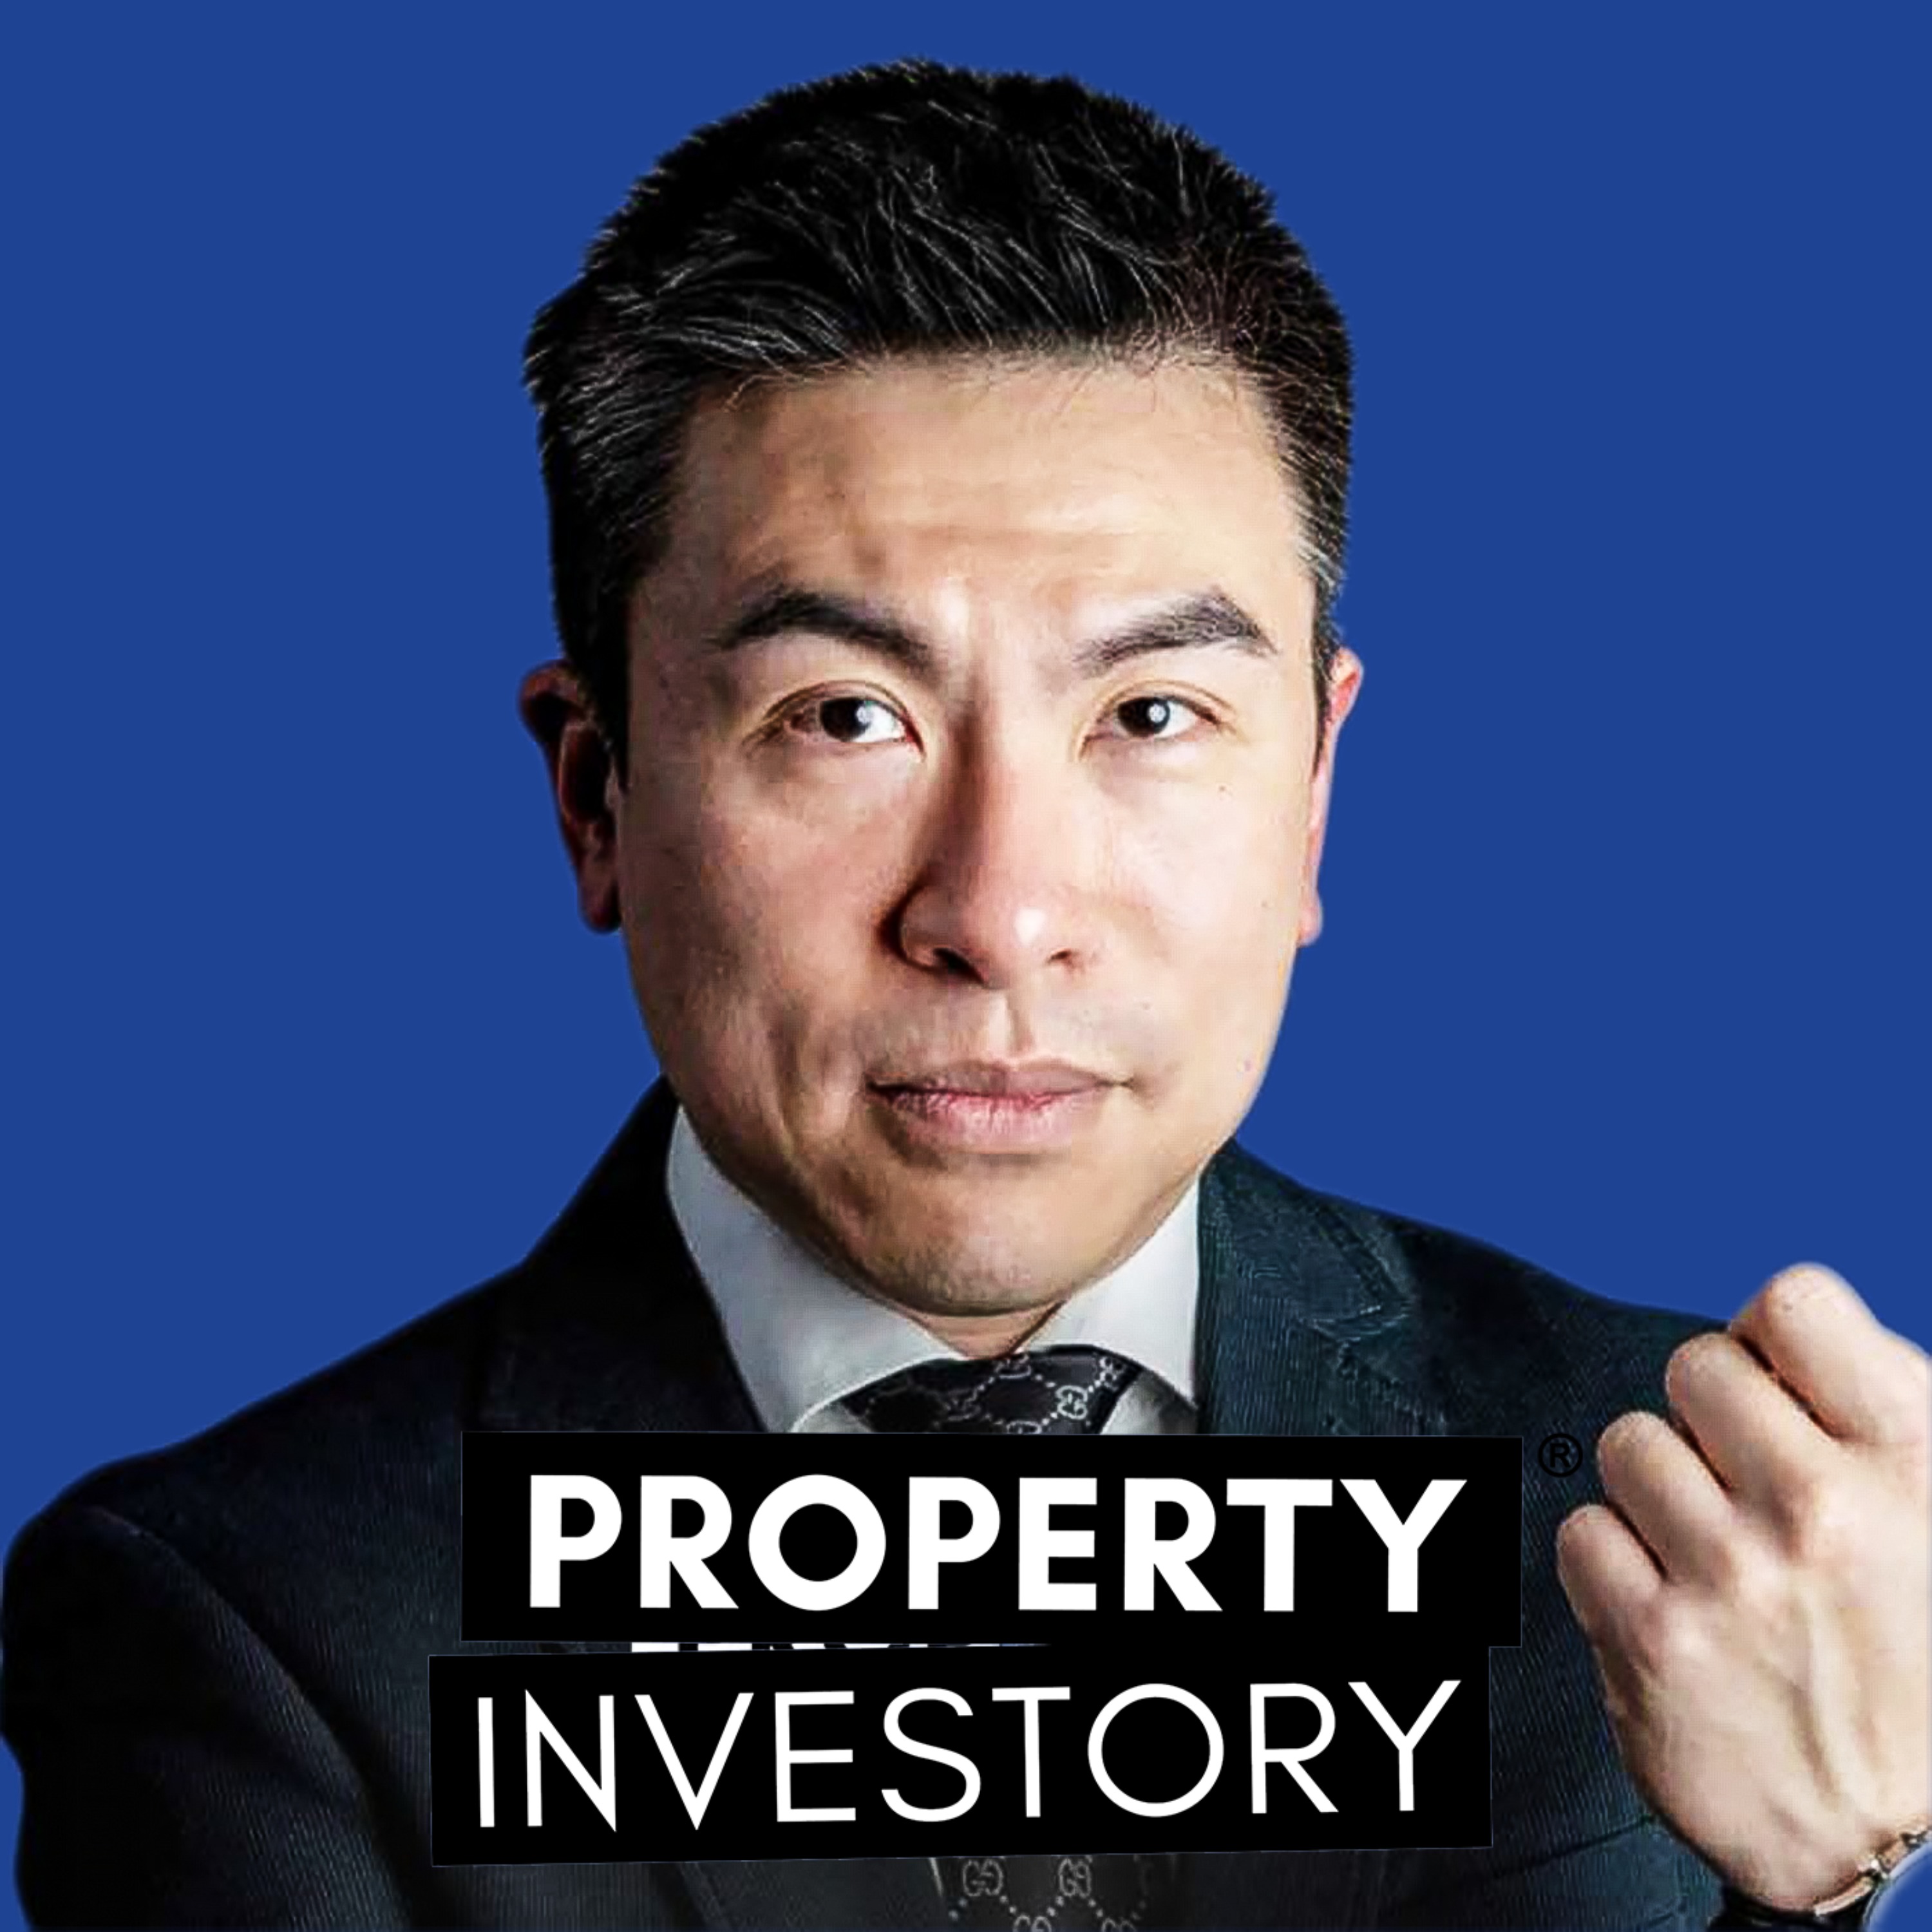 How Ricky Phoon Went From 0 Property Developments to $140M in 8 Years